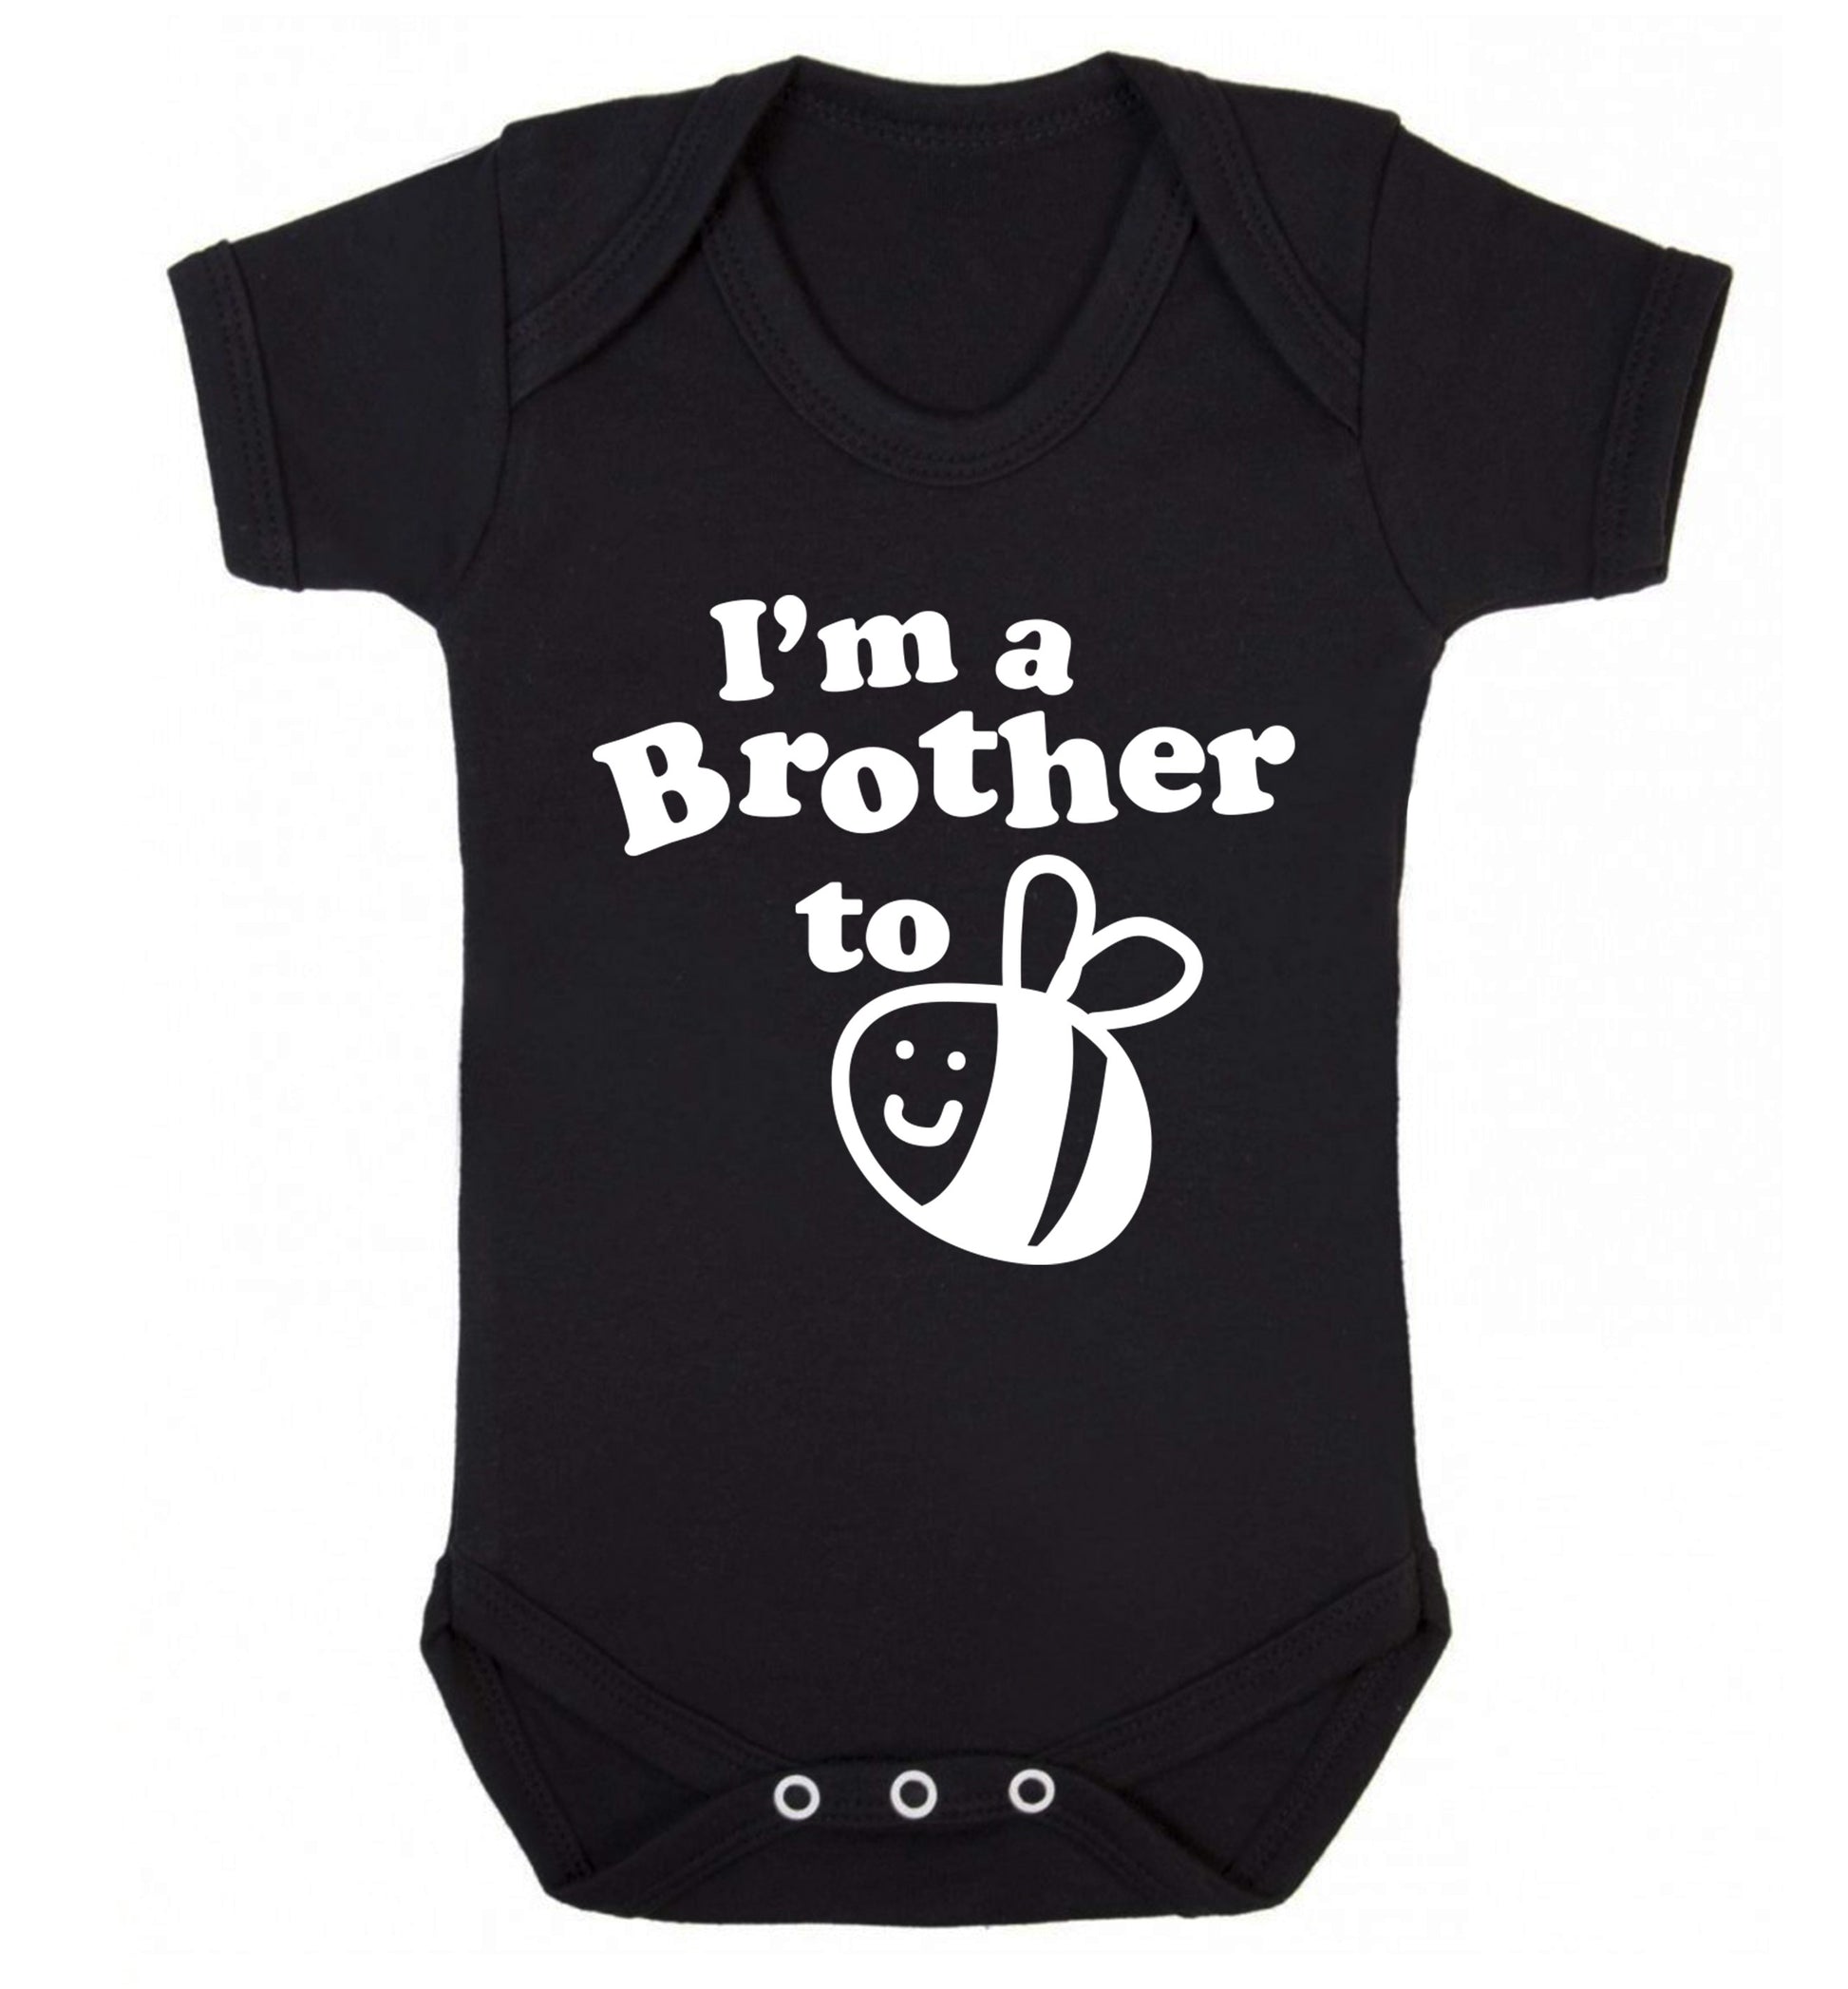 I'm a brother to be Baby Vest black 18-24 months